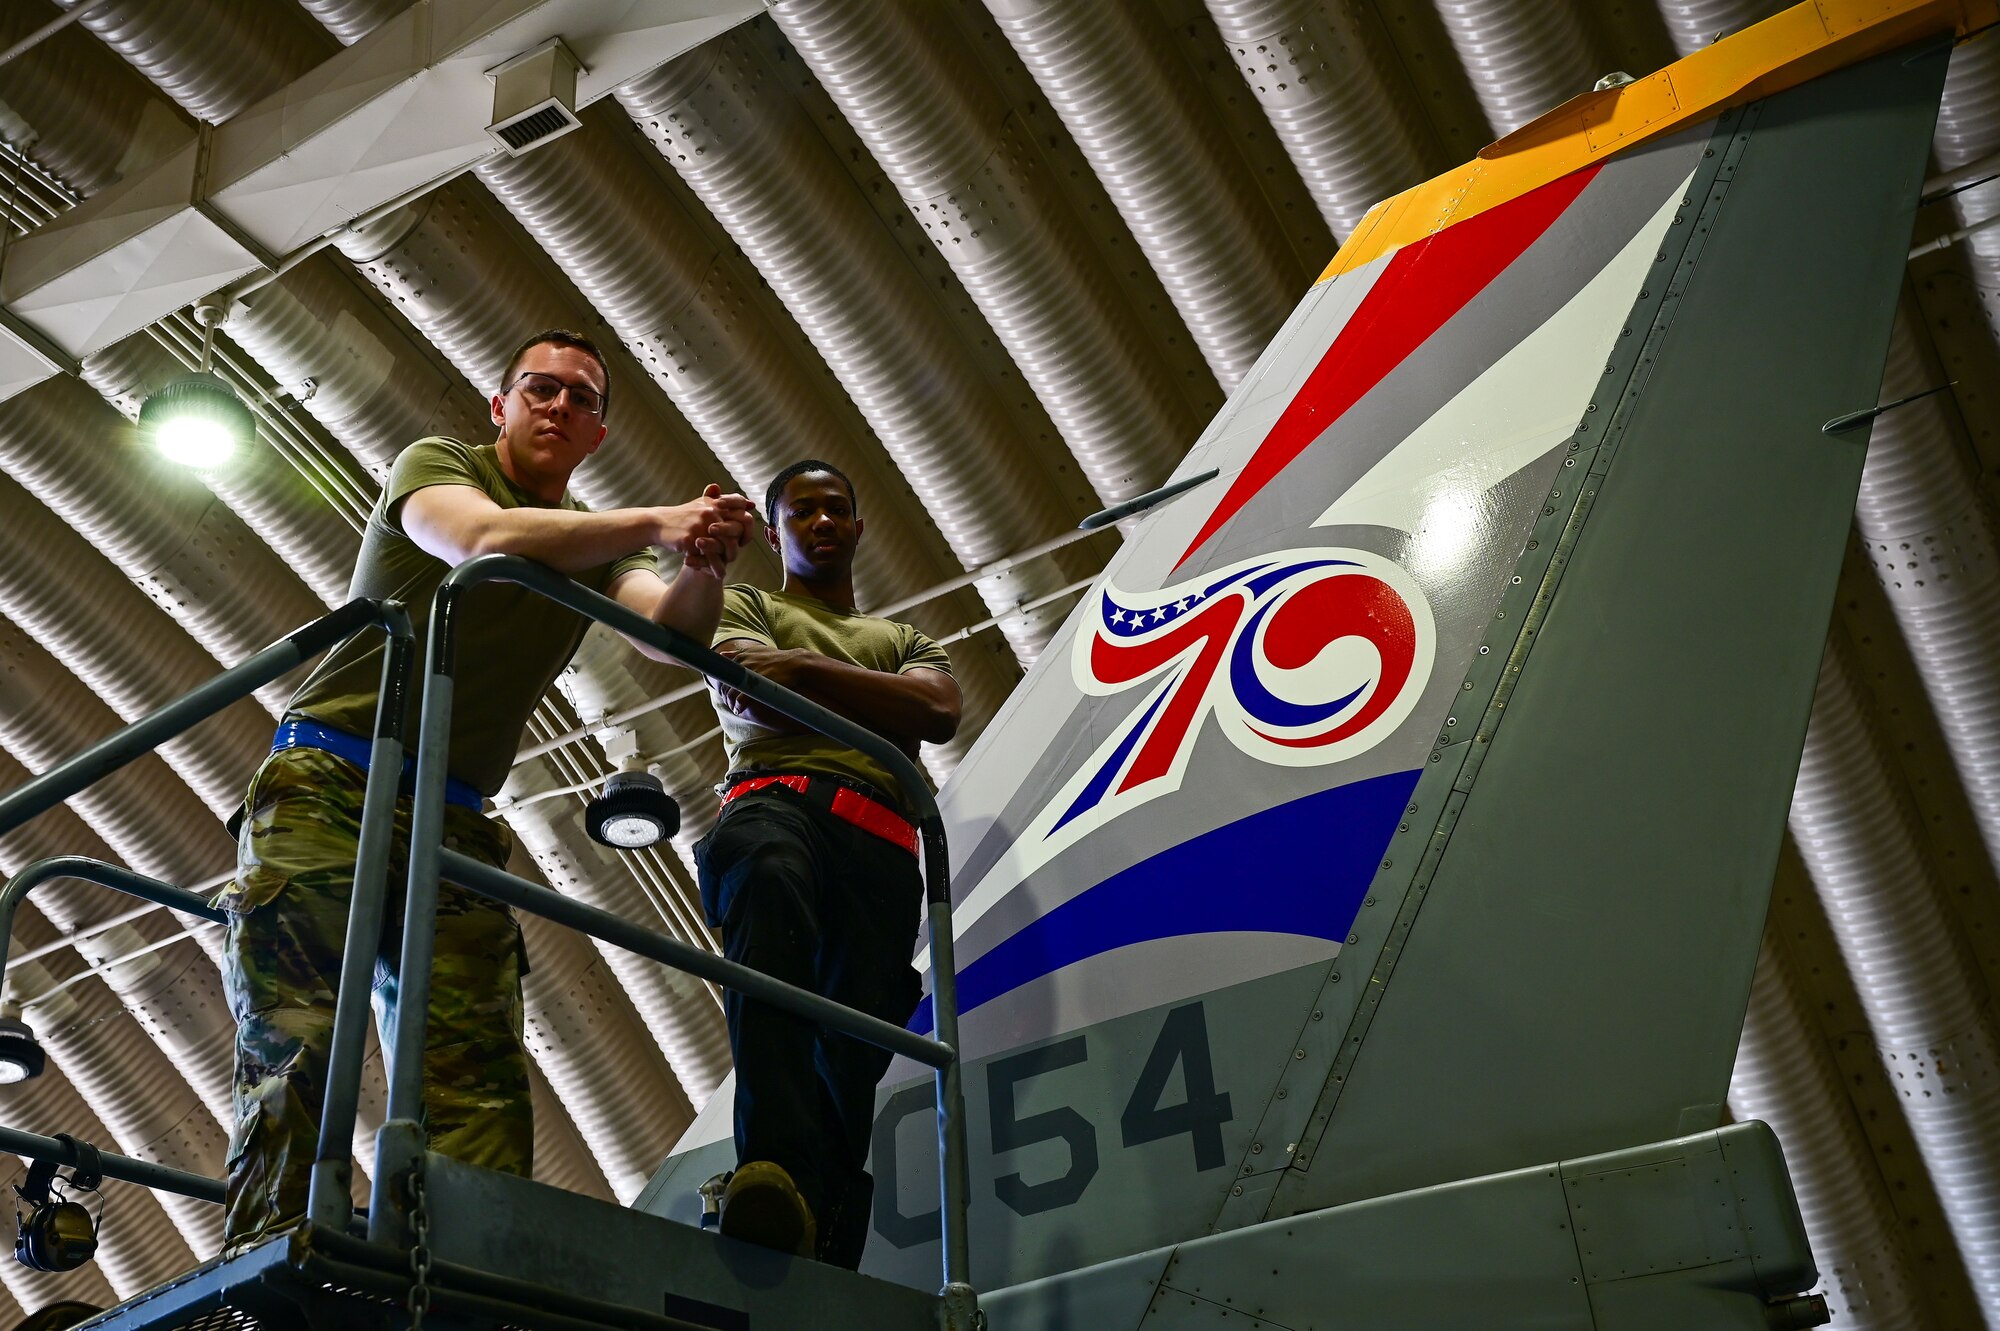 Staff Sgt. Matthew Campbell, 8th Maintenance Squadron aircraft structural maintenance (AMS) craftsman, and Senior Airman Connor Young, 8th MXS AMS journeyman, pose with the applied 70th anniversary heritage tail flash decal at Osan Air Base, Republic of Korea, May 1, 2023. After the decal is applied, sealed and dried for more than 24 hours, the aircraft is ready to fly. (U.S. Air Force photo by Tech. Sgt. Timothy Dischinat)